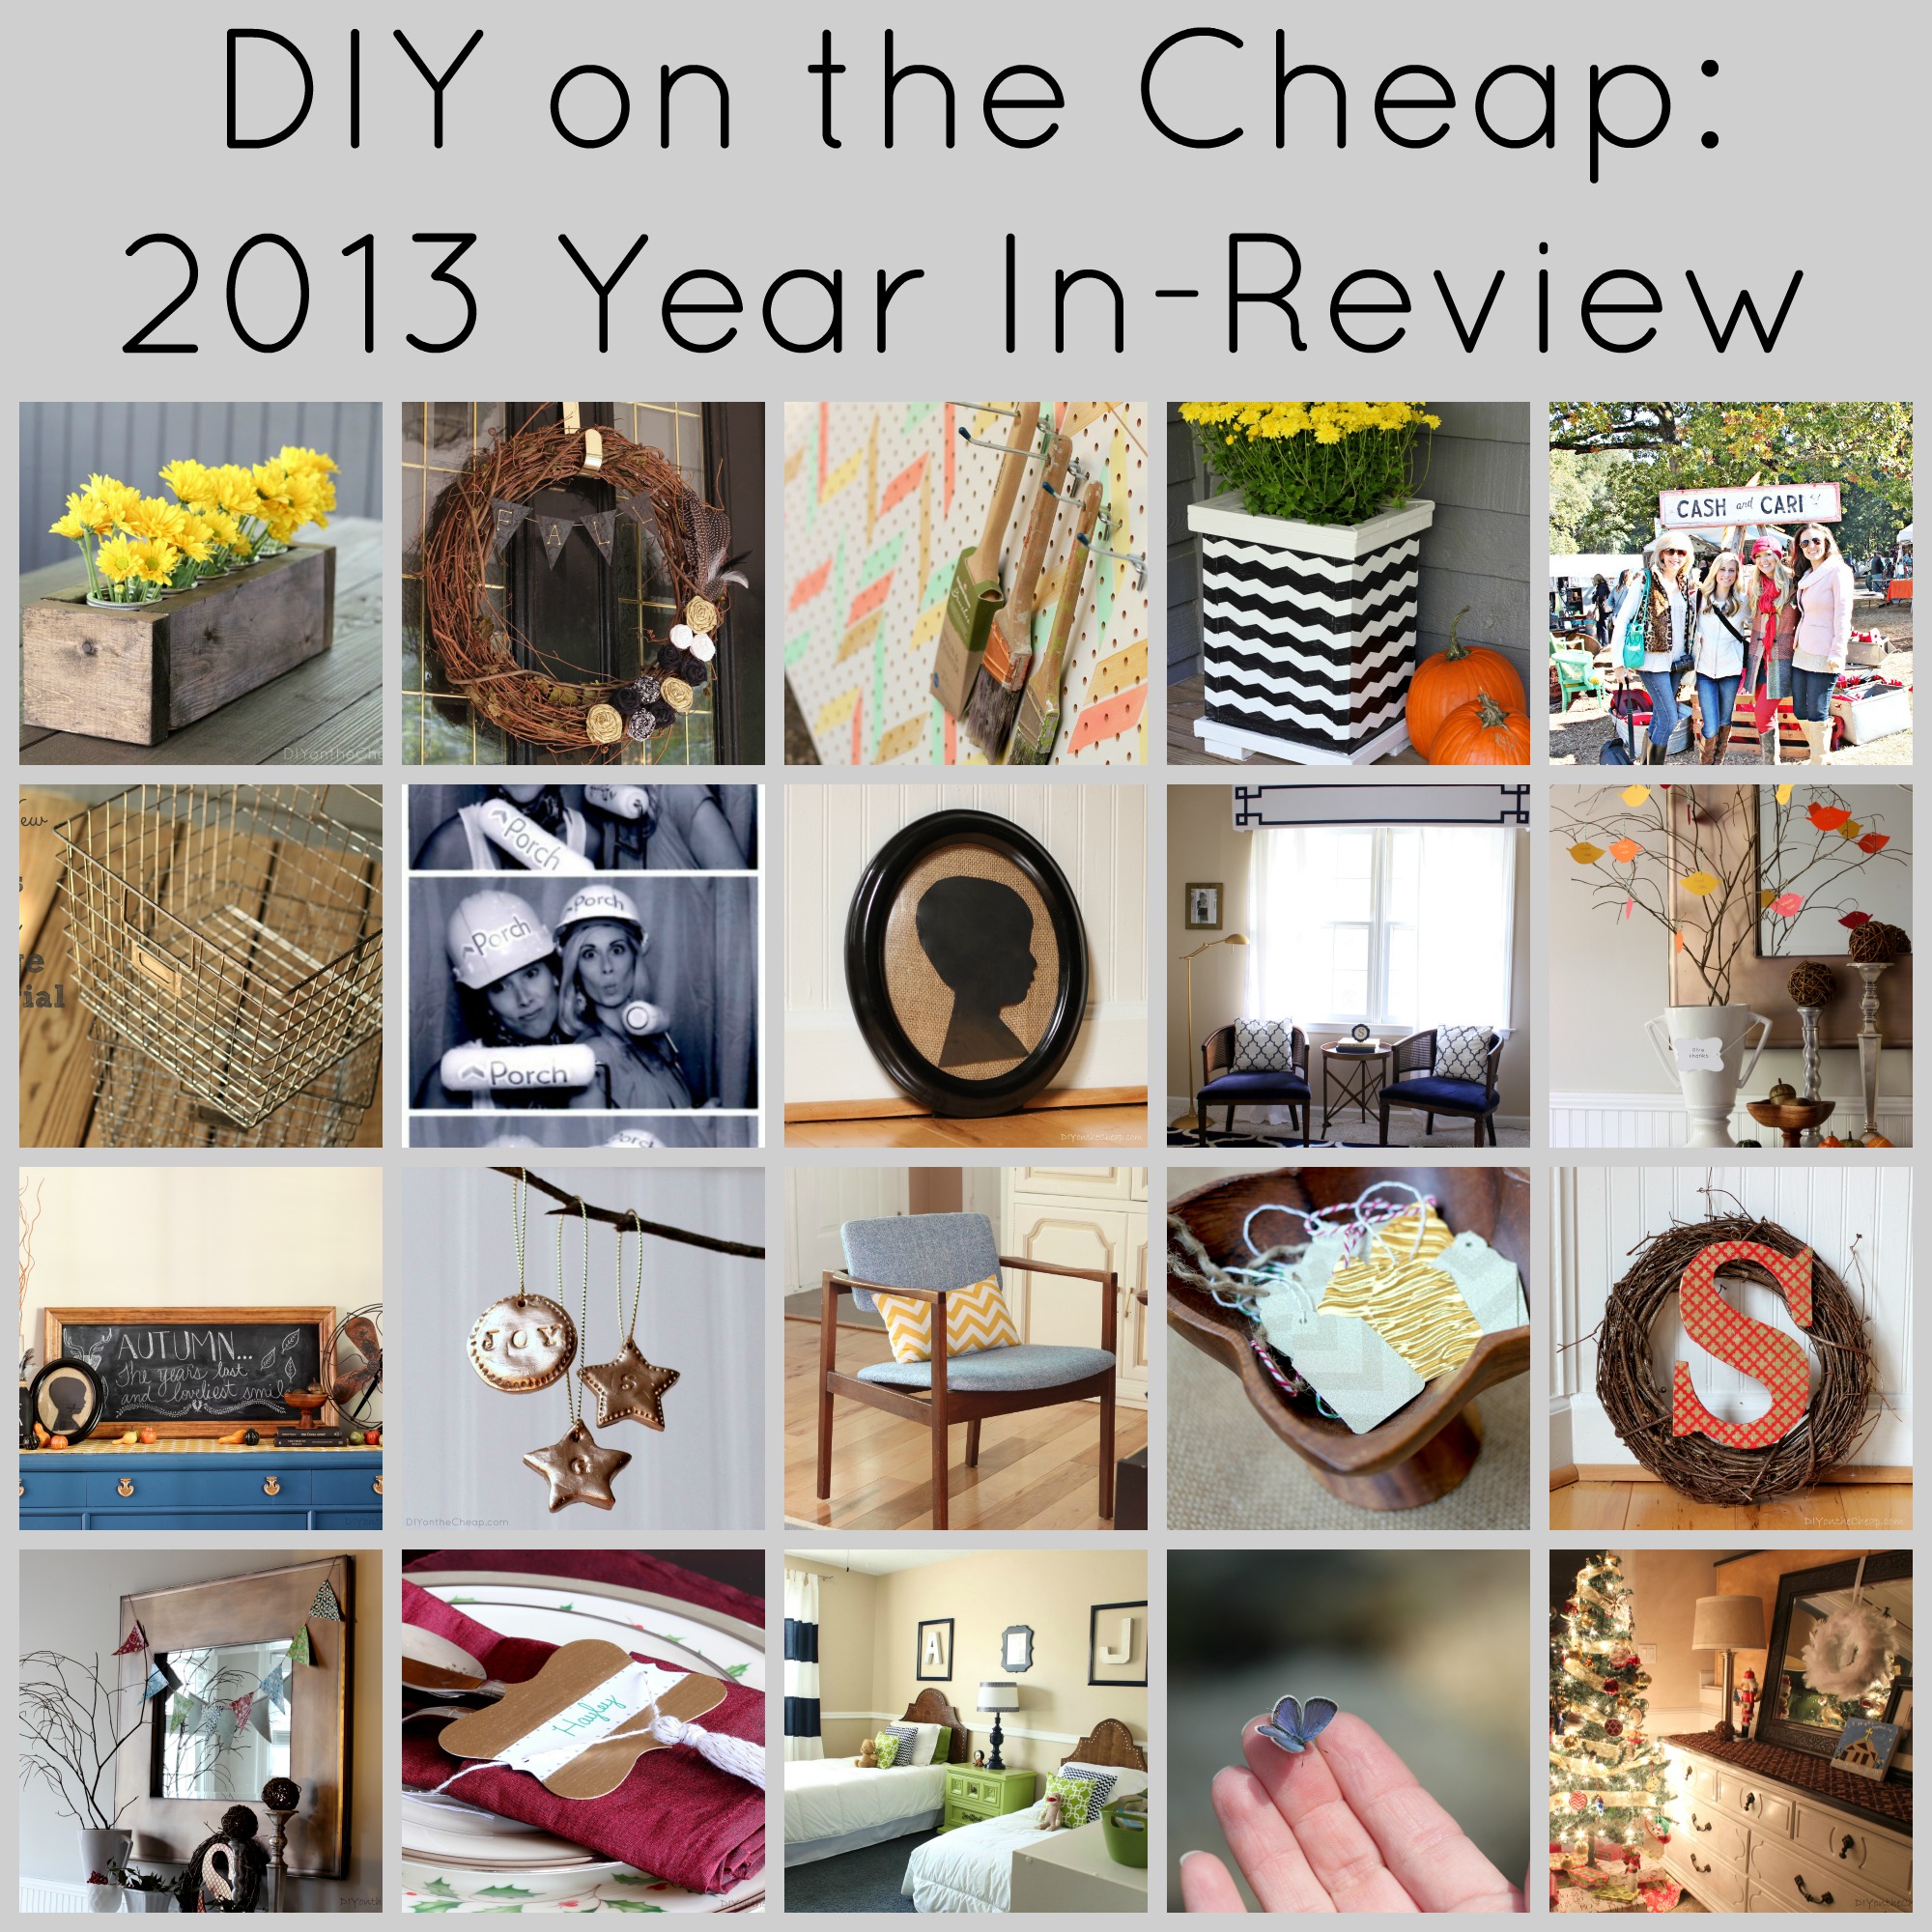 Year In Review at DIY on the Cheap